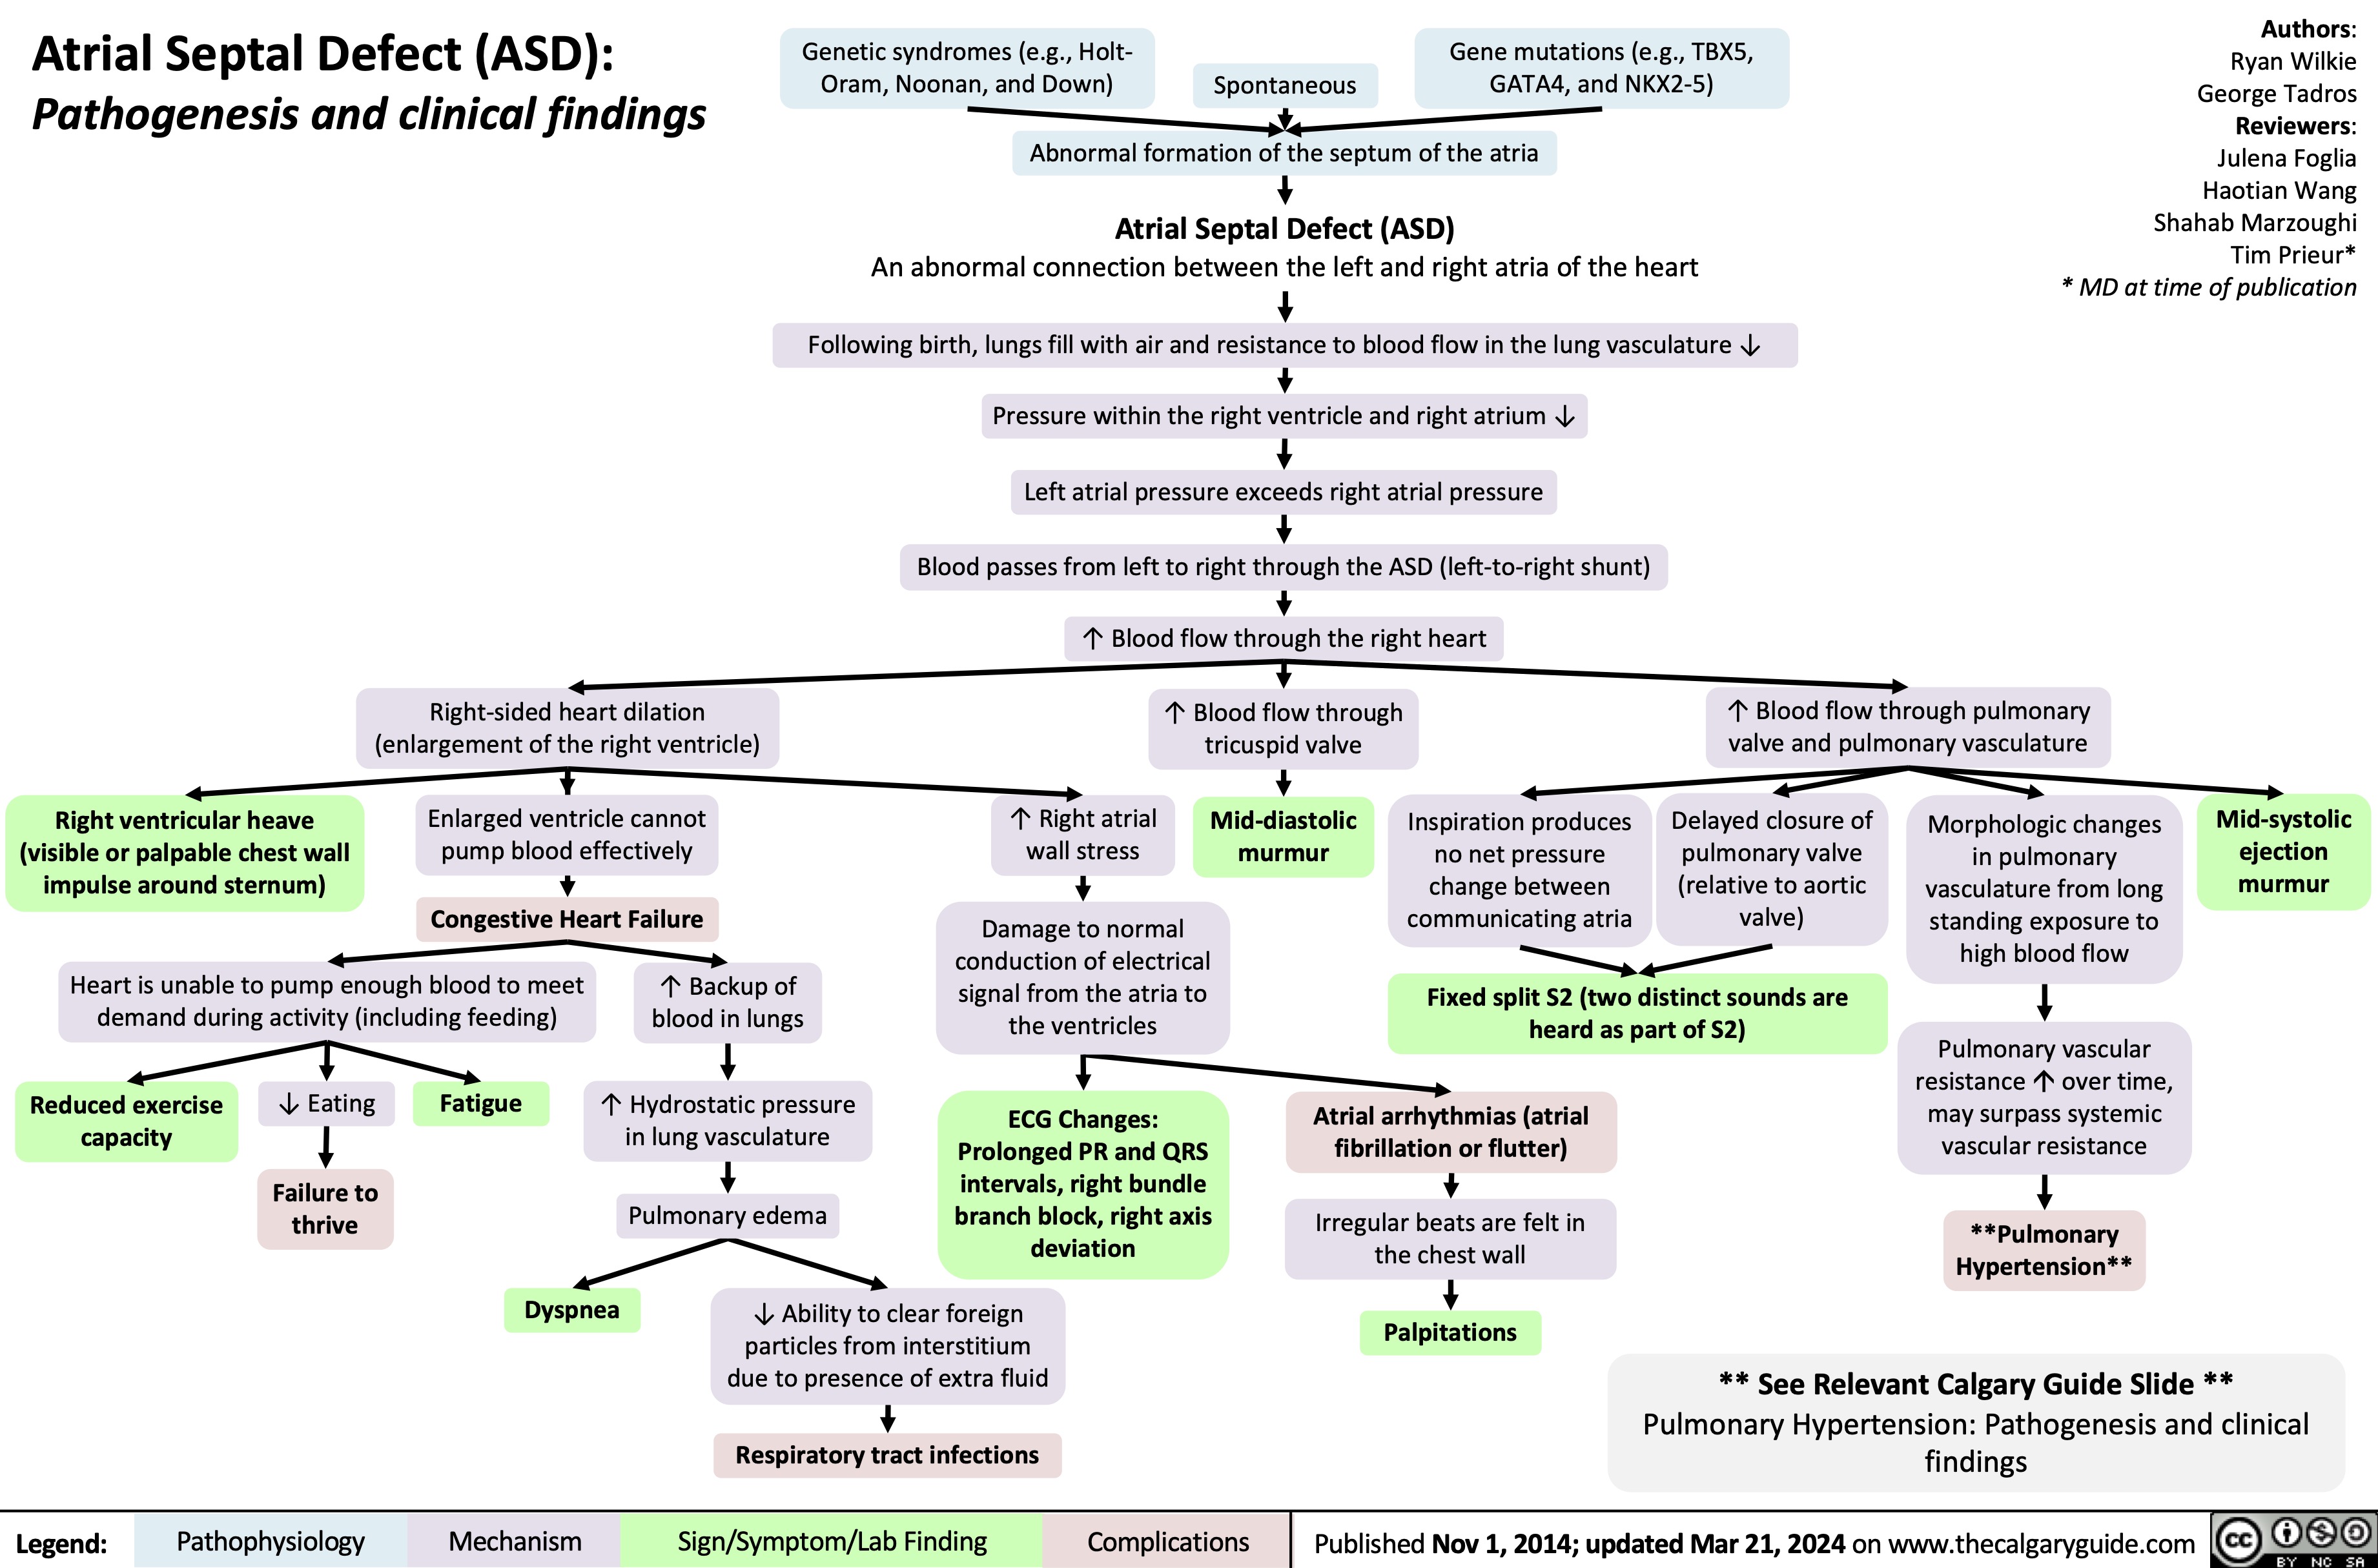 Atrial Septal Defect (ASD):
Pathogenesis and clinical findings
Genetic syndromes (e.g., Holt- Oram, Noonan, and Down)
Gene mutations (e.g., TBX5, GATA4, and NKX2-5)
Authors: Ryan Wilkie George Tadros Reviewers: Julena Foglia Haotian Wang Shahab Marzoughi Tim Prieur* * MD at time of publication
   Spontaneous
Abnormal formation of the septum of the atria
   Atrial Septal Defect (ASD)
An abnormal connection between the left and right atria of the heart
Following birth, lungs fill with air and resistance to blood flow in the lung vasculature ↓ Pressure within the right ventricle and right atrium ↓
Left atrial pressure exceeds right atrial pressure
Blood passes from left to right through the ASD (left-to-right shunt)
↑ Blood flow through the right heart
↑ Blood flow through
tricuspid valve
Mid-diastolic murmur
          Right-sided heart dilation (enlargement of the right ventricle)
Enlarged ventricle cannot pump blood effectively
Congestive Heart Failure
↑ Blood flow through pulmonary valve and pulmonary vasculature
               Right ventricular heave (visible or palpable chest wall impulse around sternum)
↑ Right atrial wall stress
Inspiration produces no net pressure change between communicating atria
Delayed closure of pulmonary valve (relative to aortic valve)
Morphologic changes in pulmonary vasculature from long standing exposure to high blood flow
Pulmonary vascular resistanceáover time, may surpass systemic vascular resistance
**Pulmonary Hypertension**
Mid-systolic ejection murmur
      Heart is unable to pump enough blood to meet demand during activity (including feeding)
↑ Backup of blood in lungs
↑ Hydrostatic pressure in lung vasculature
Pulmonary edema
Damage to normal conduction of electrical signal from the atria to the ventricles
ECG Changes: Prolonged PR and QRS intervals, right bundle branch block, right axis deviation
Fixed split S2 (two distinct sounds are heard as part of S2)
         Reduced exercise capacity
↓ Eating
Failure to thrive
Fatigue
Atrial arrhythmias (atrial fibrillation or flutter)
Irregular beats are felt in the chest wall
Palpitations
          Dyspnea
↓ Ability to clear foreign particles from interstitium due to presence of extra fluid
Respiratory tract infections
  ** See Relevant Calgary Guide Slide **
Pulmonary Hypertension: Pathogenesis and clinical findings
  Legend:
 Pathophysiology
Mechanism
 Sign/Symptom/Lab Finding
 Complications
 Published Nov 1, 2014; updated Mar 21, 2024 on www.thecalgaryguide.com
  